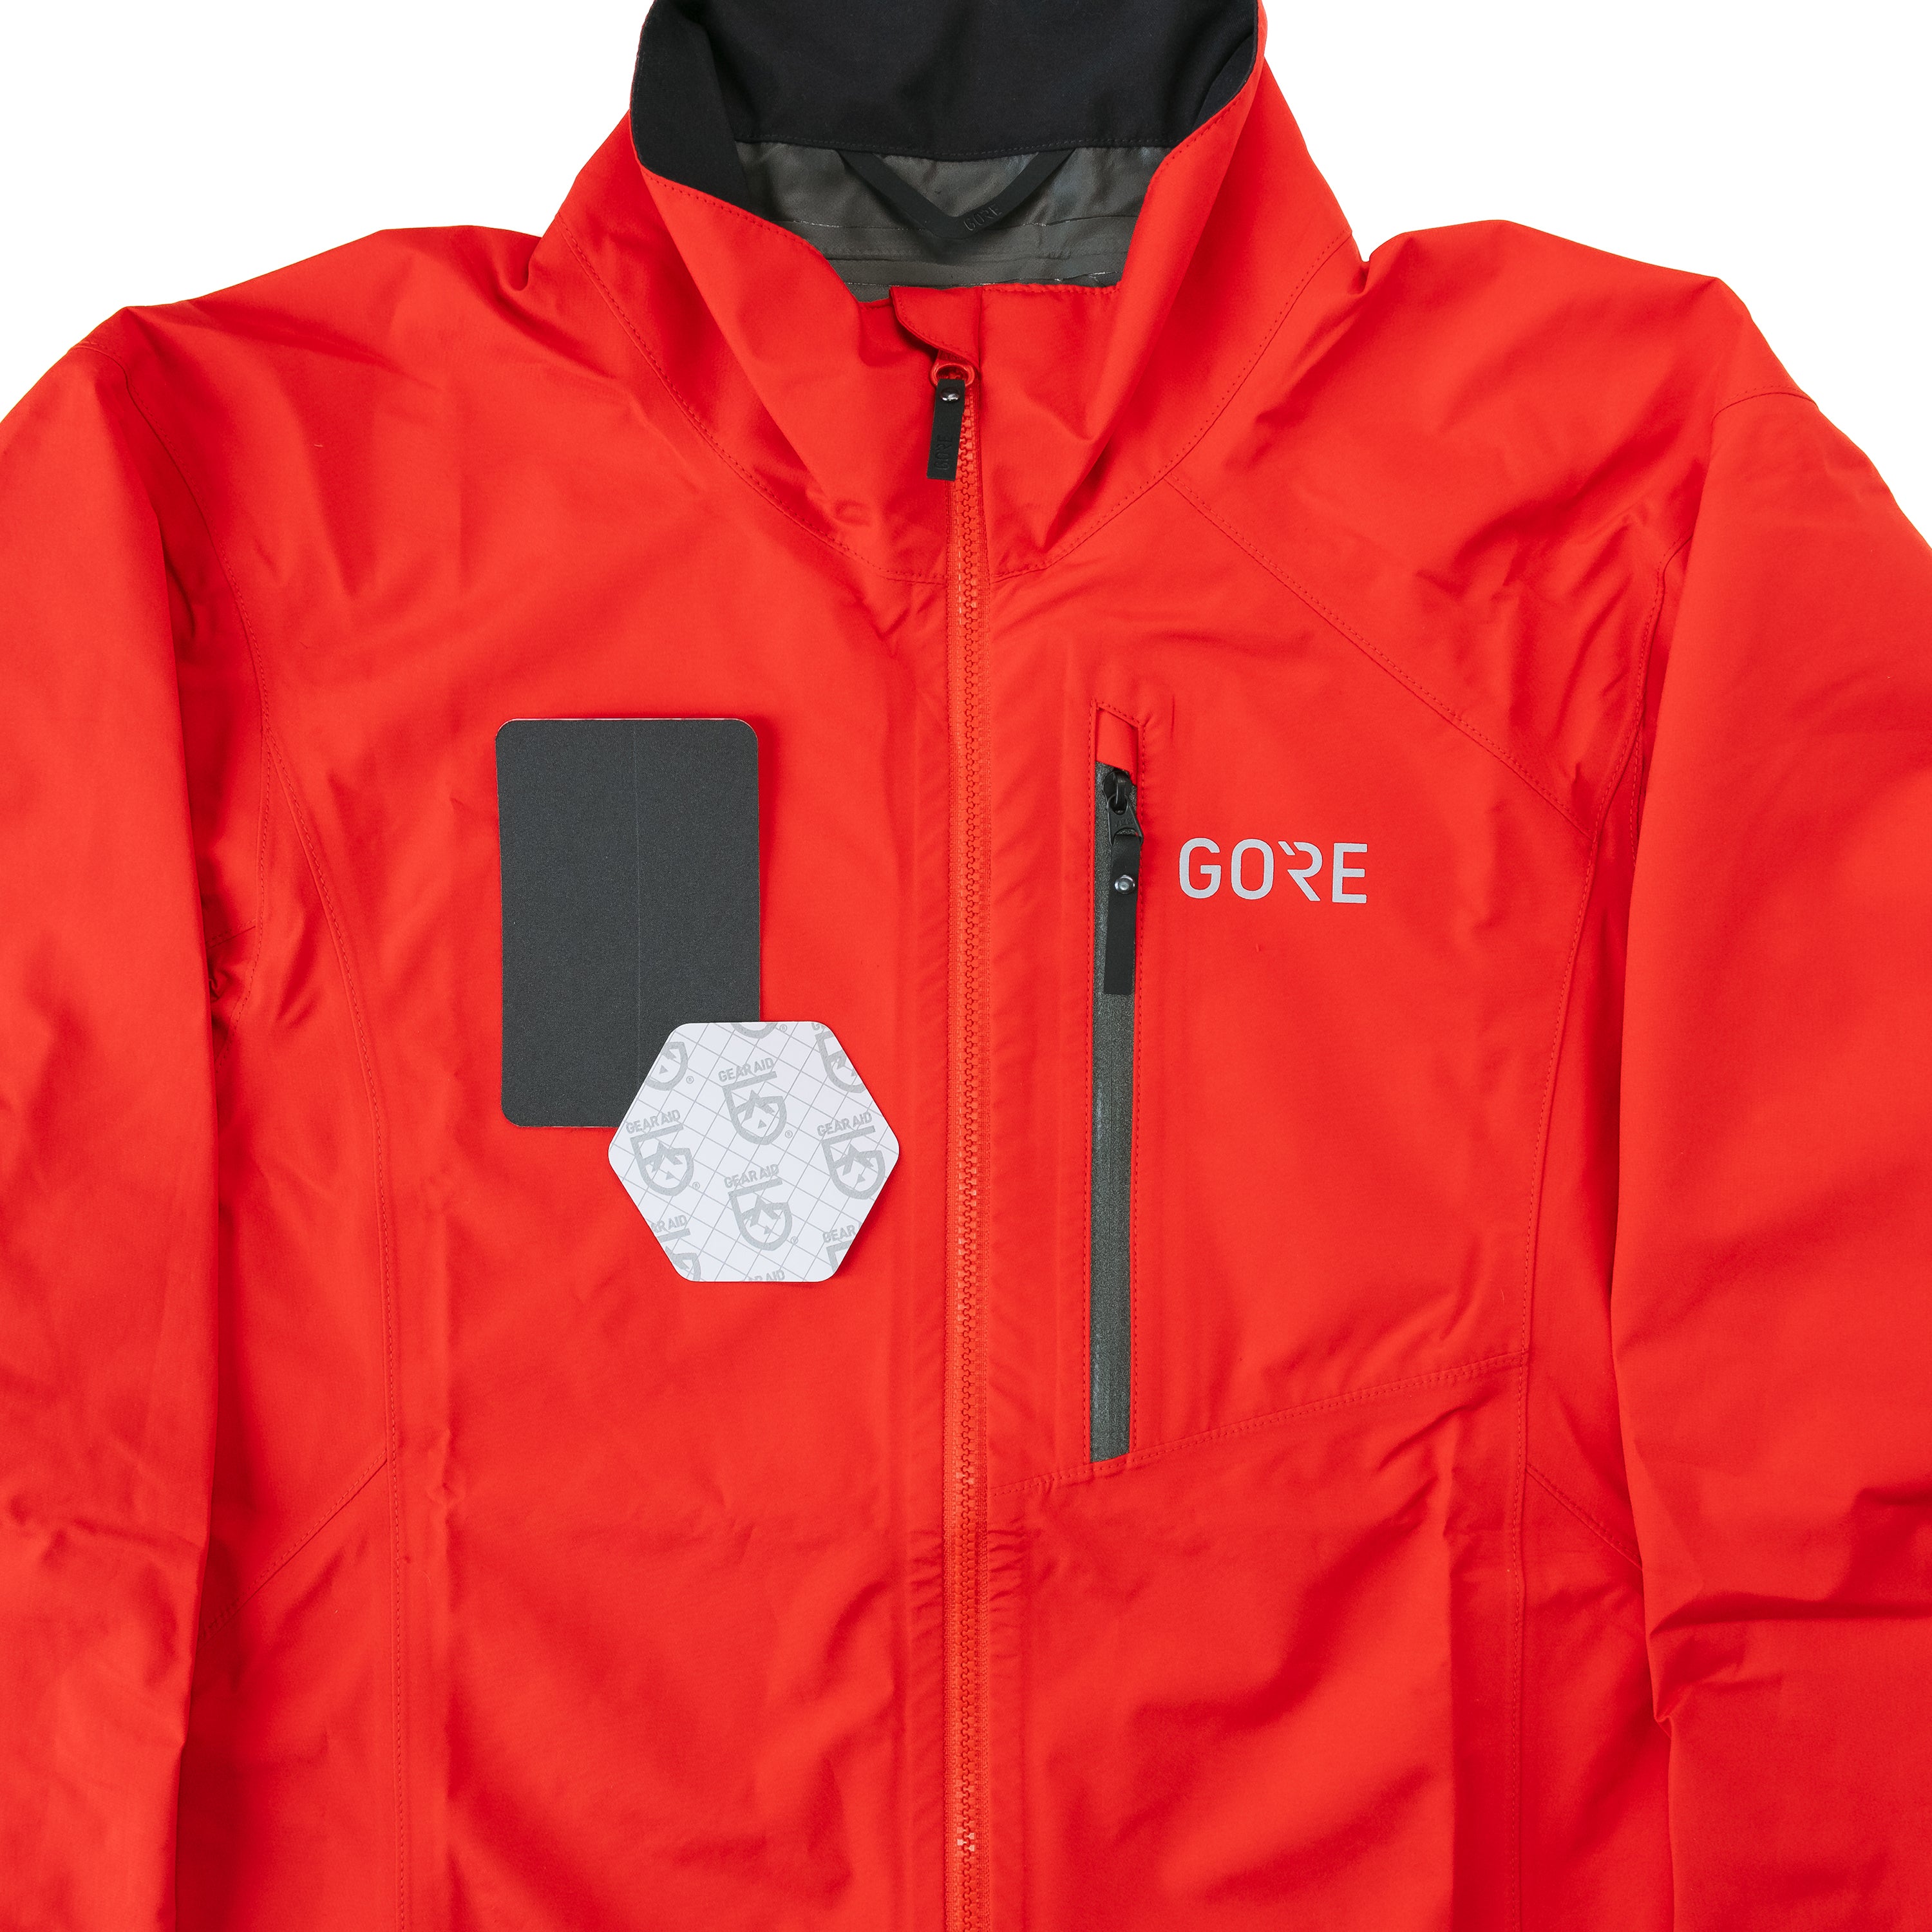 Tips for Using Tenacious Tape GORE-TEX Patches